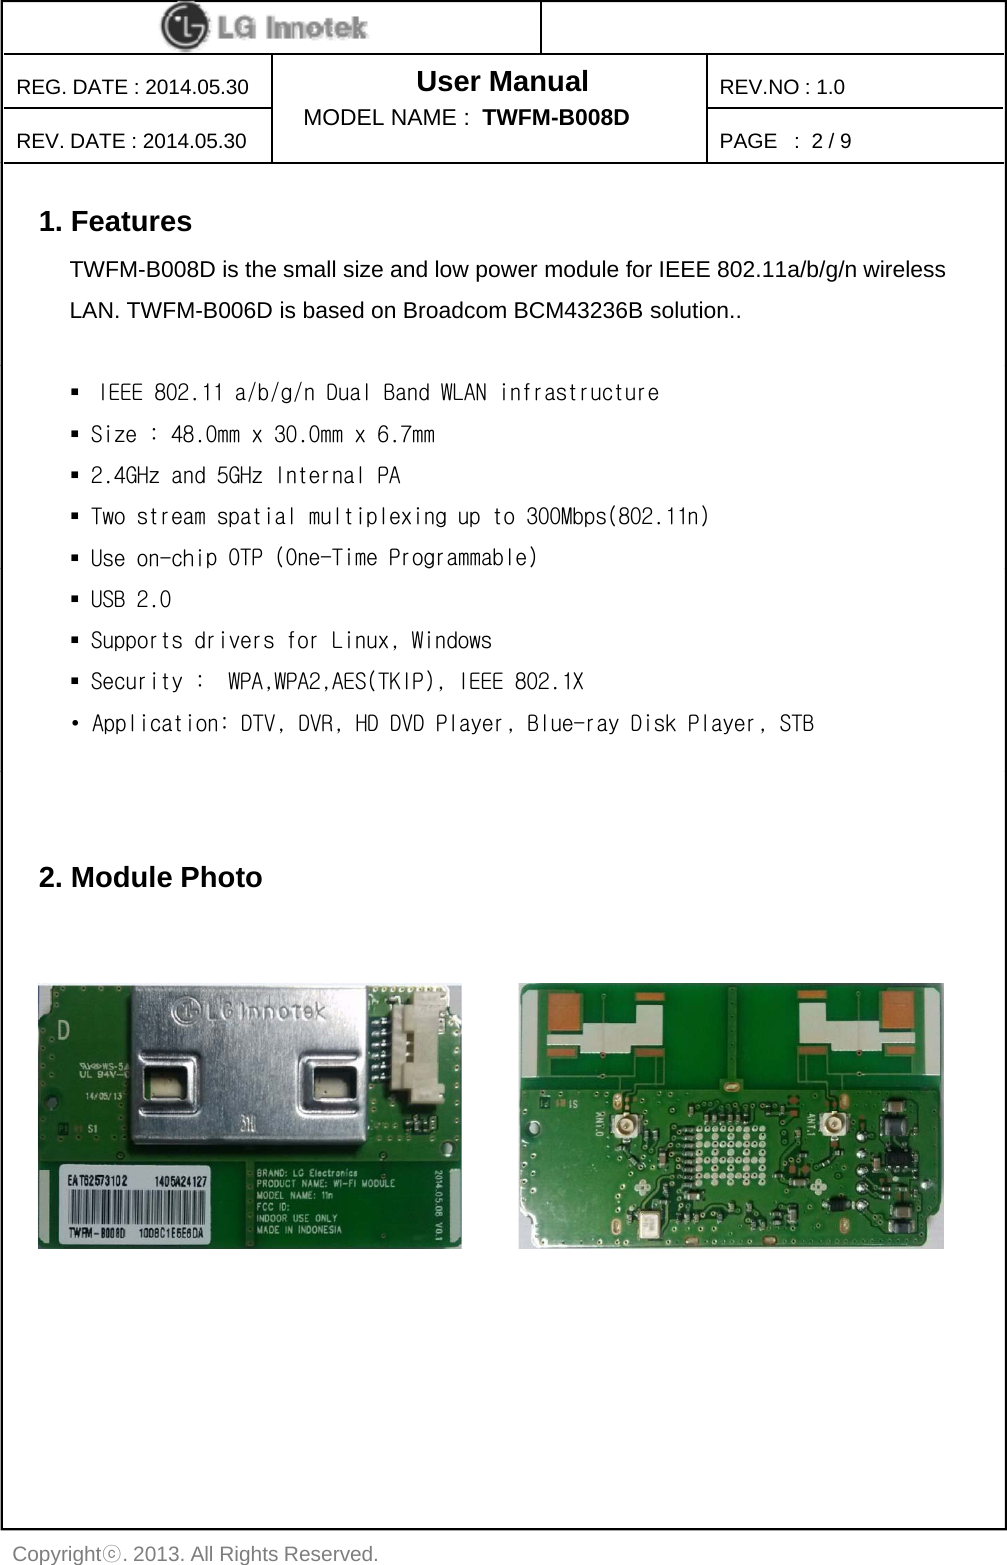 User ManualPAGE   :REG. DATE : 2014.05.30REV. DATE : 2014.05.30REV.NO : 1.0MODEL NAME :  TWFM-B008D 2 / 91. FeaturesTWFM-B008D is the small size and low power module for IEEE 802.11a/b/g/n wirelessLAN. TWFM-B006D is based on Broadcom BCM43236B solution..IEEE 802.11 a/b/g/n Dual Band WLAN infrastructureSize : 48.0mm x 30.0mm x 6.7mm2.4GHz and 5GHz Internal PATwo stream spatial multiplexing up to 300Mbps(802.11n)Use on-chip OTP (One-Time Programmable)pgUSB 2.0Supports drivers for Linux, WindowsSecurity :  WPA,WPA2,AES(TKIP), IEEE 802.1X • Application: DTV, DVR, HD DVD Player, Blue-ray Disk Player, STB2. Module PhotoCopyrightⓒ. 2013. All Rights Reserved.